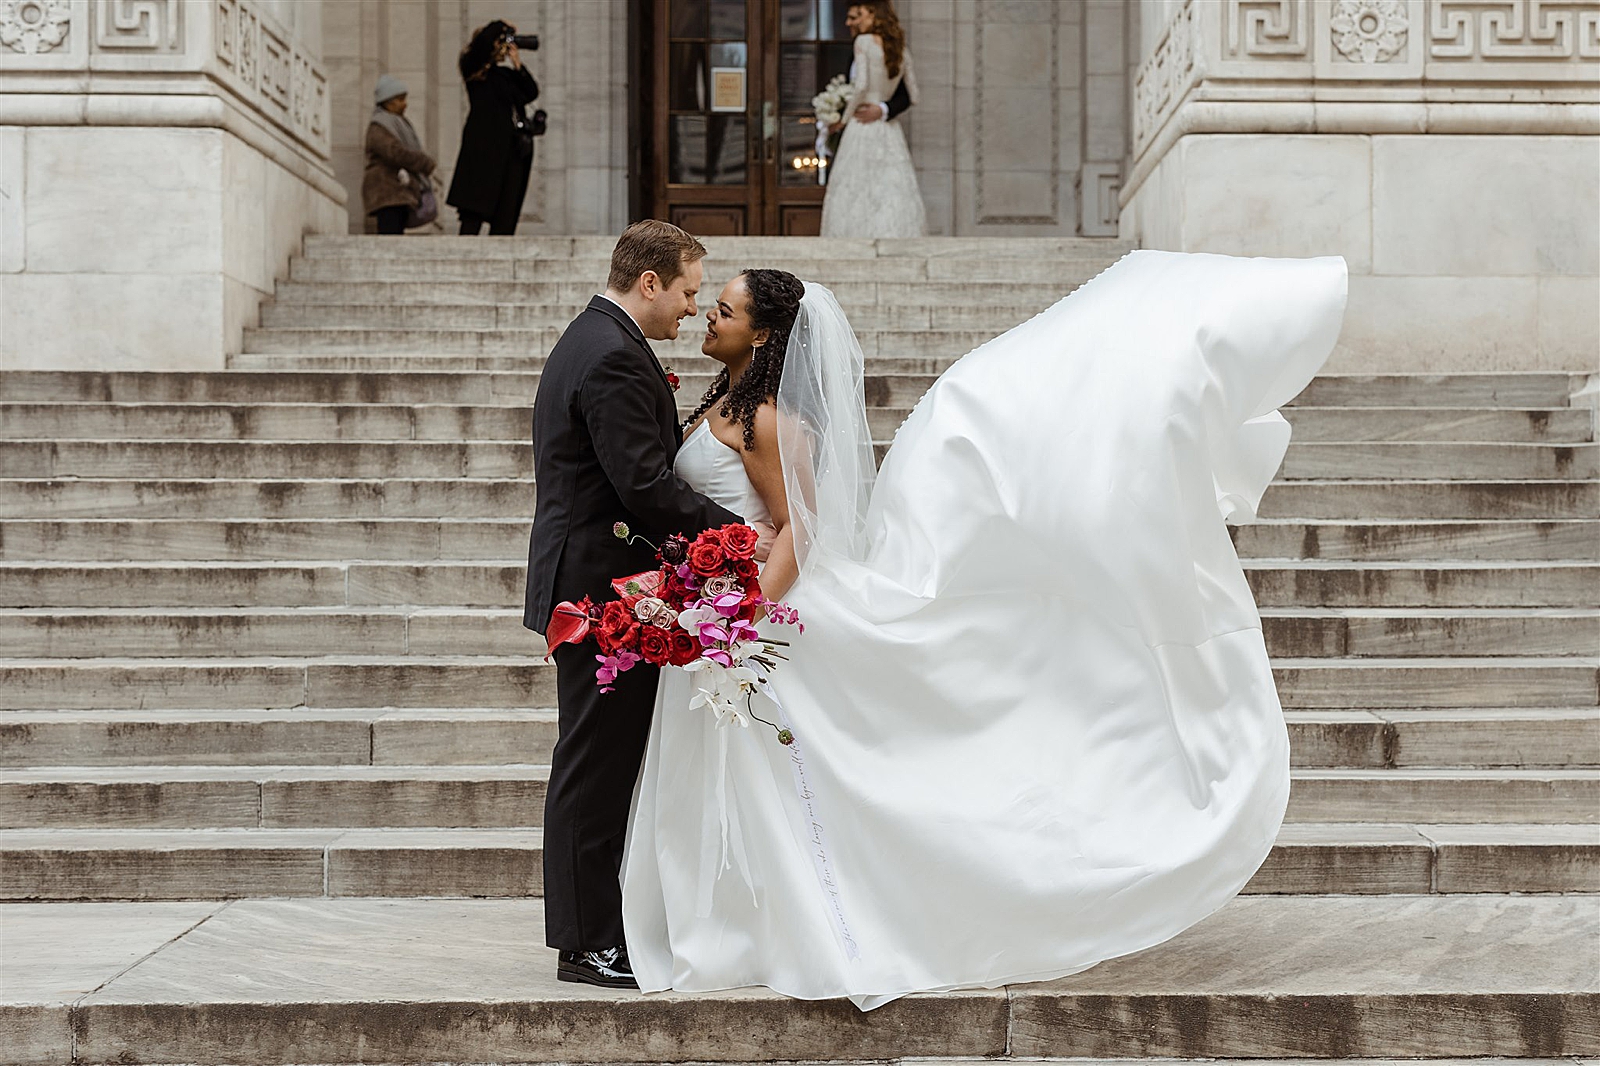 Bride and Groom are all smiles as they embrace on the steps of the New York Public Library.